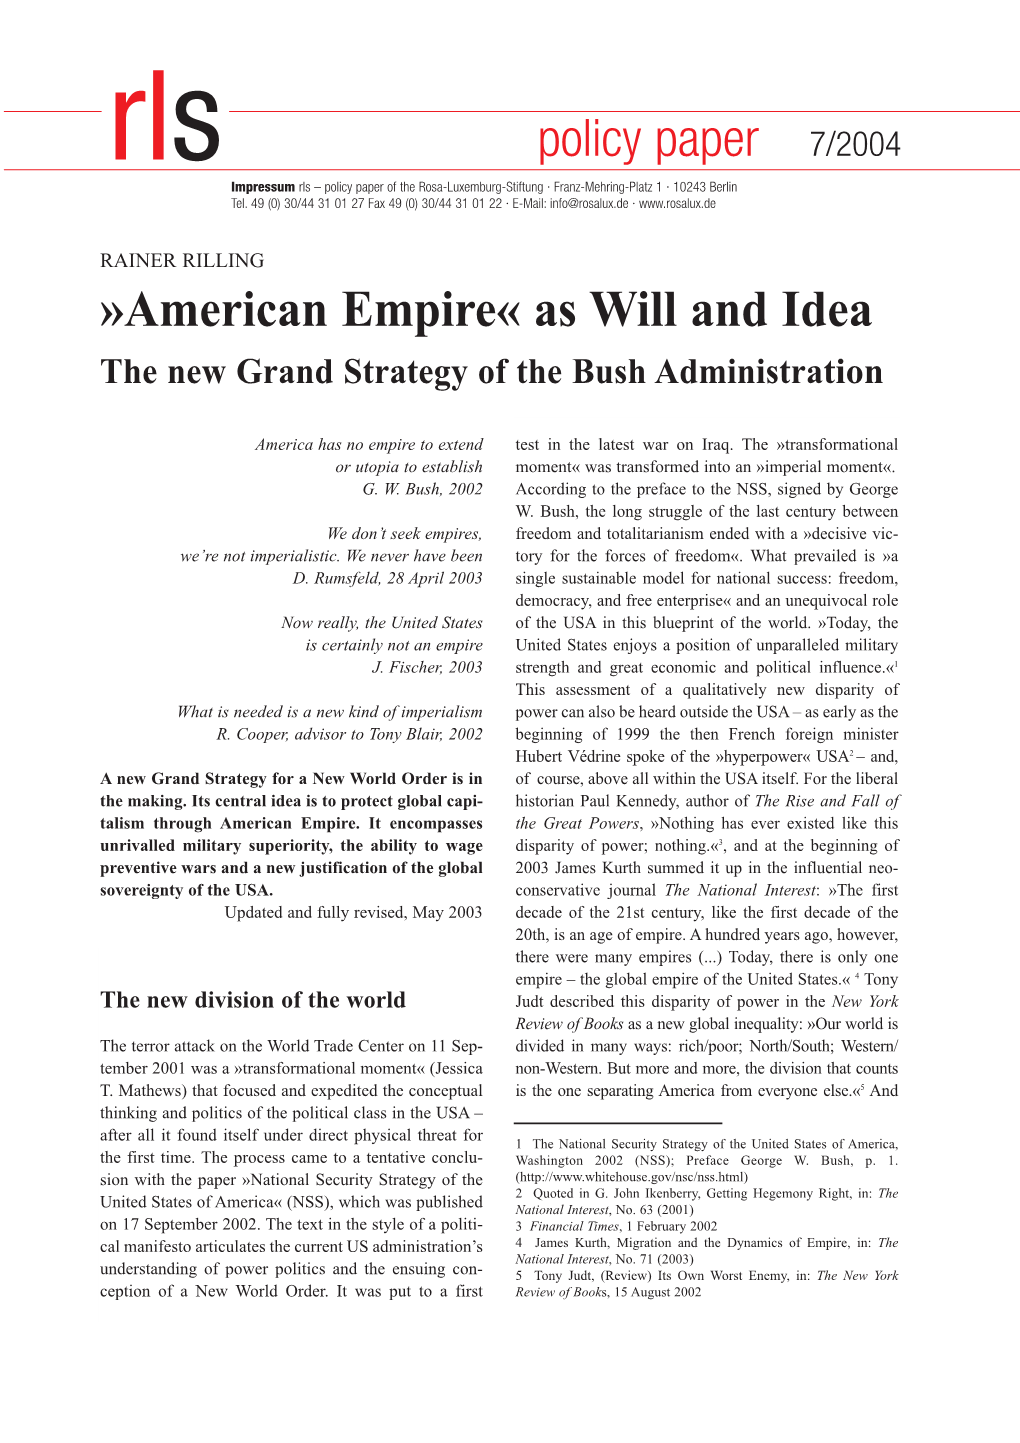 American Empire« As Will and Idea the New Grand Strategy of the Bush Administration